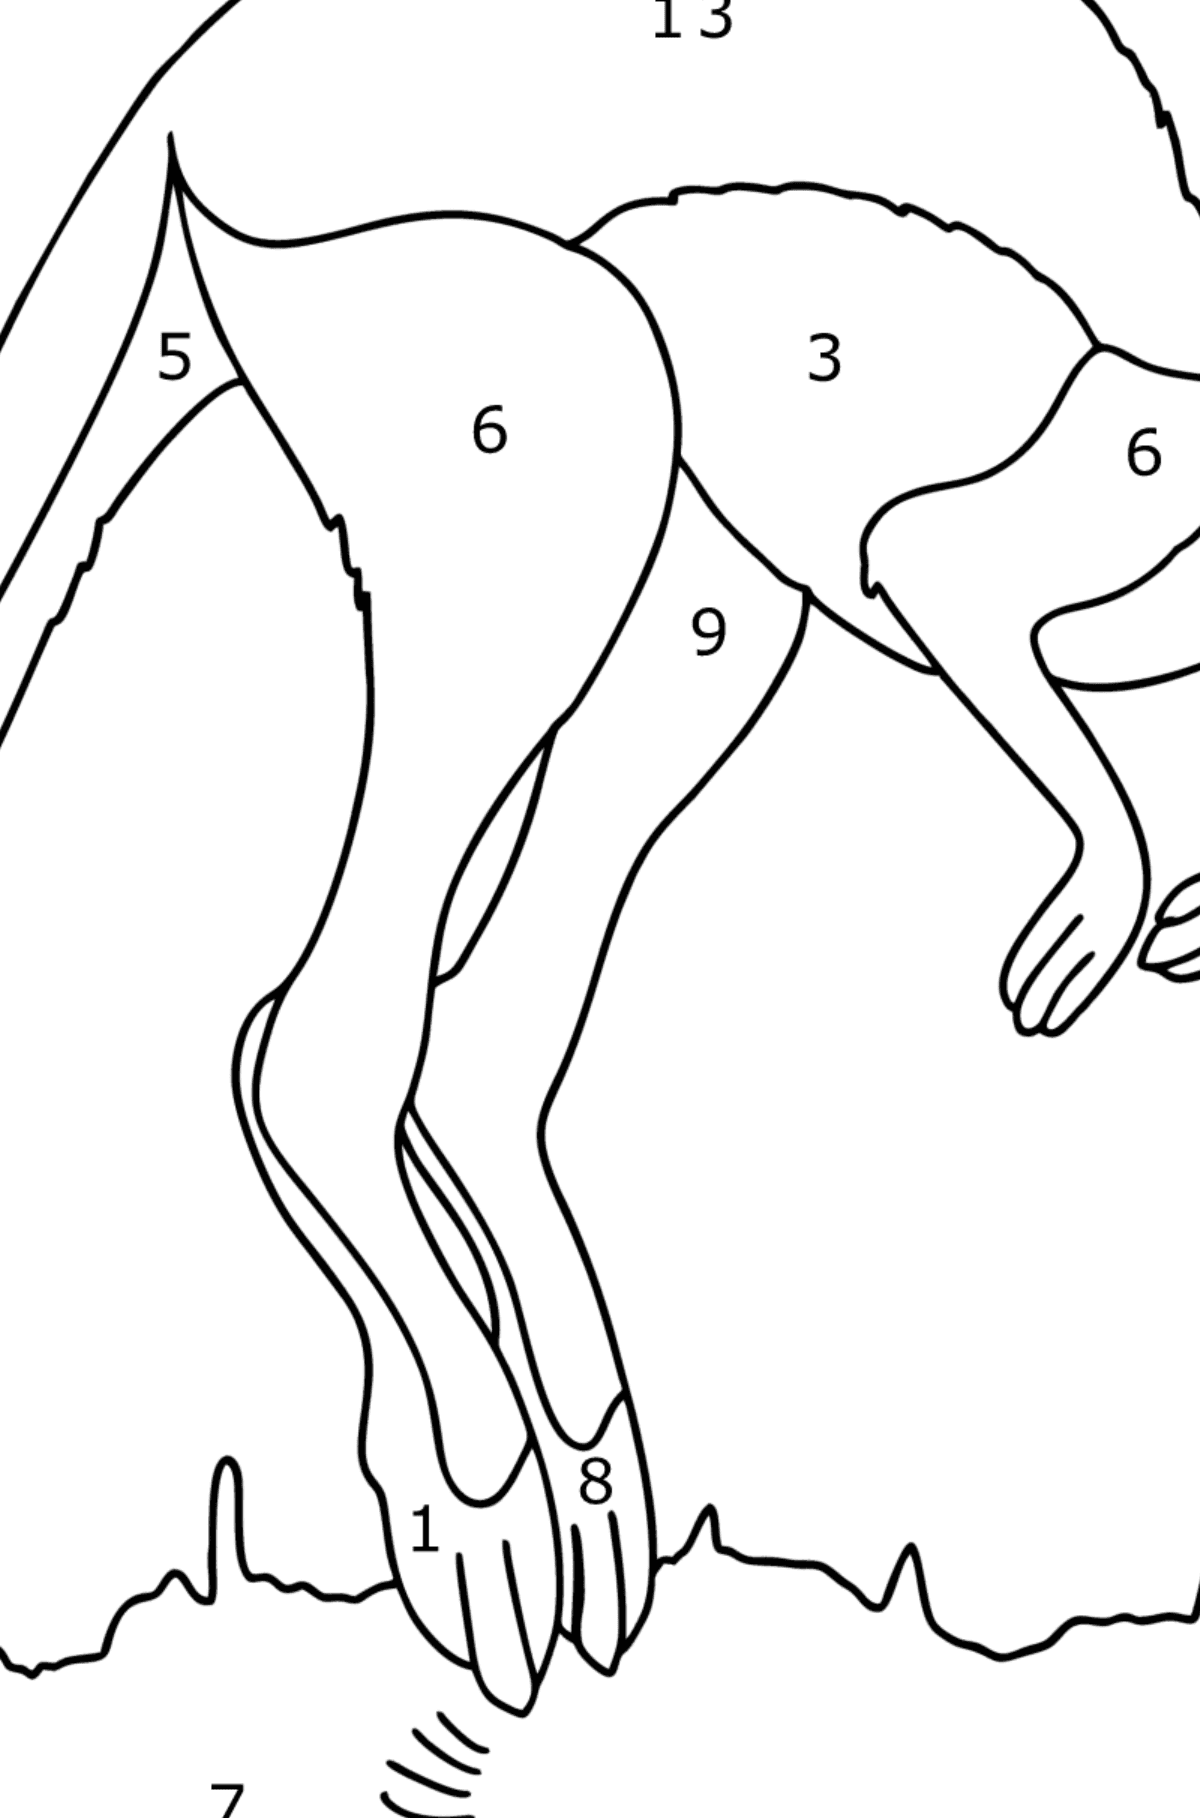 Jumping Kangaroo coloring page - Coloring by Numbers for Kids